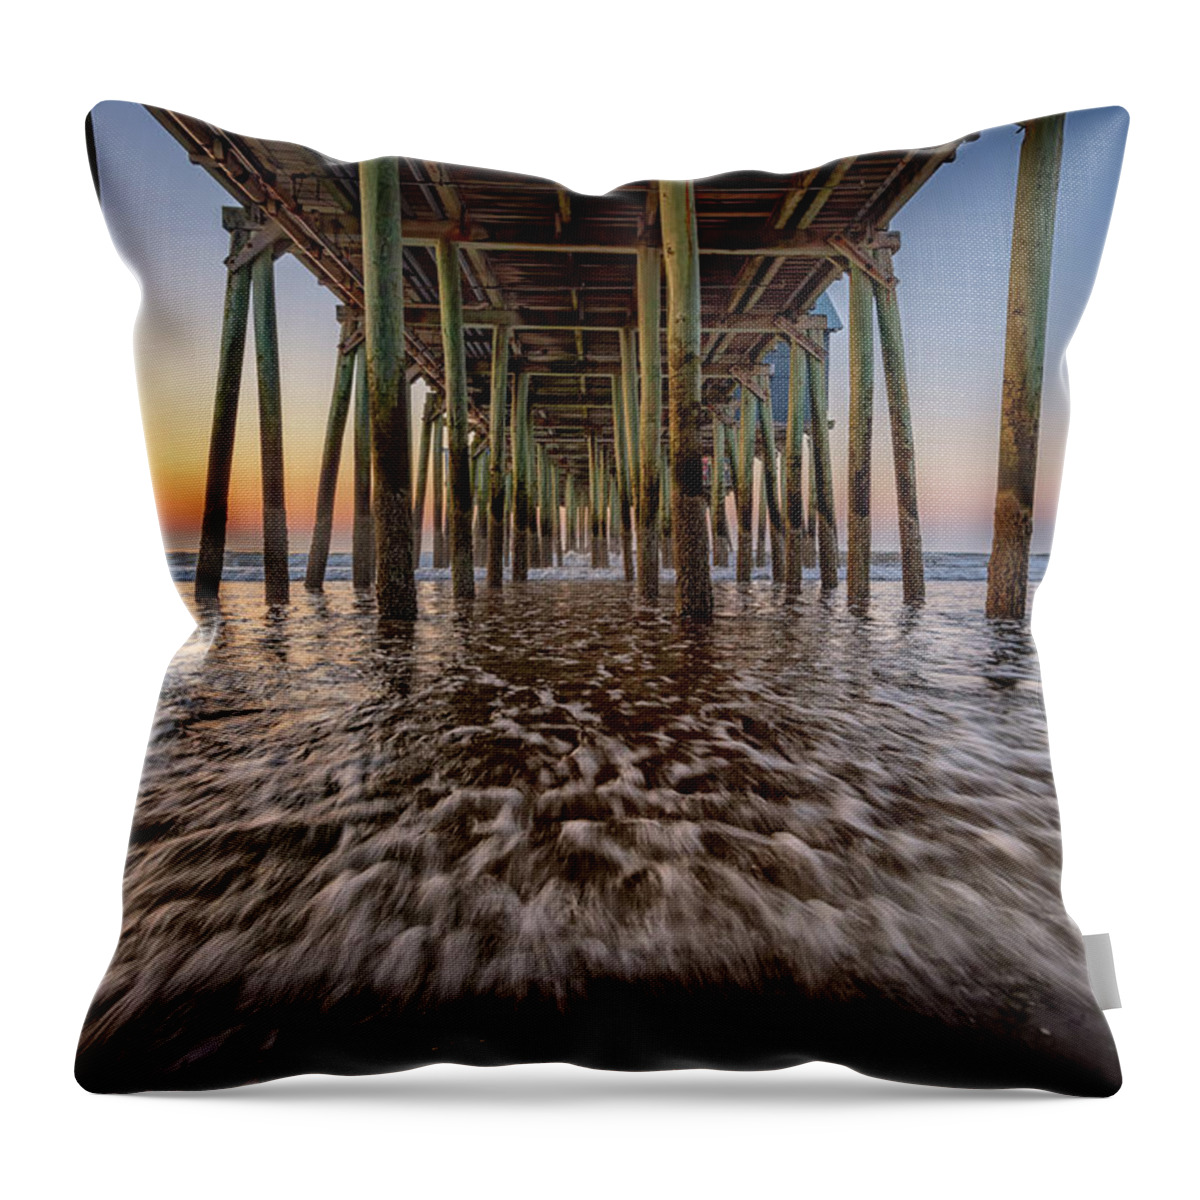 Old Orchard Beach Throw Pillow featuring the photograph Under the Pier at Old Orchard Beach by Rick Berk